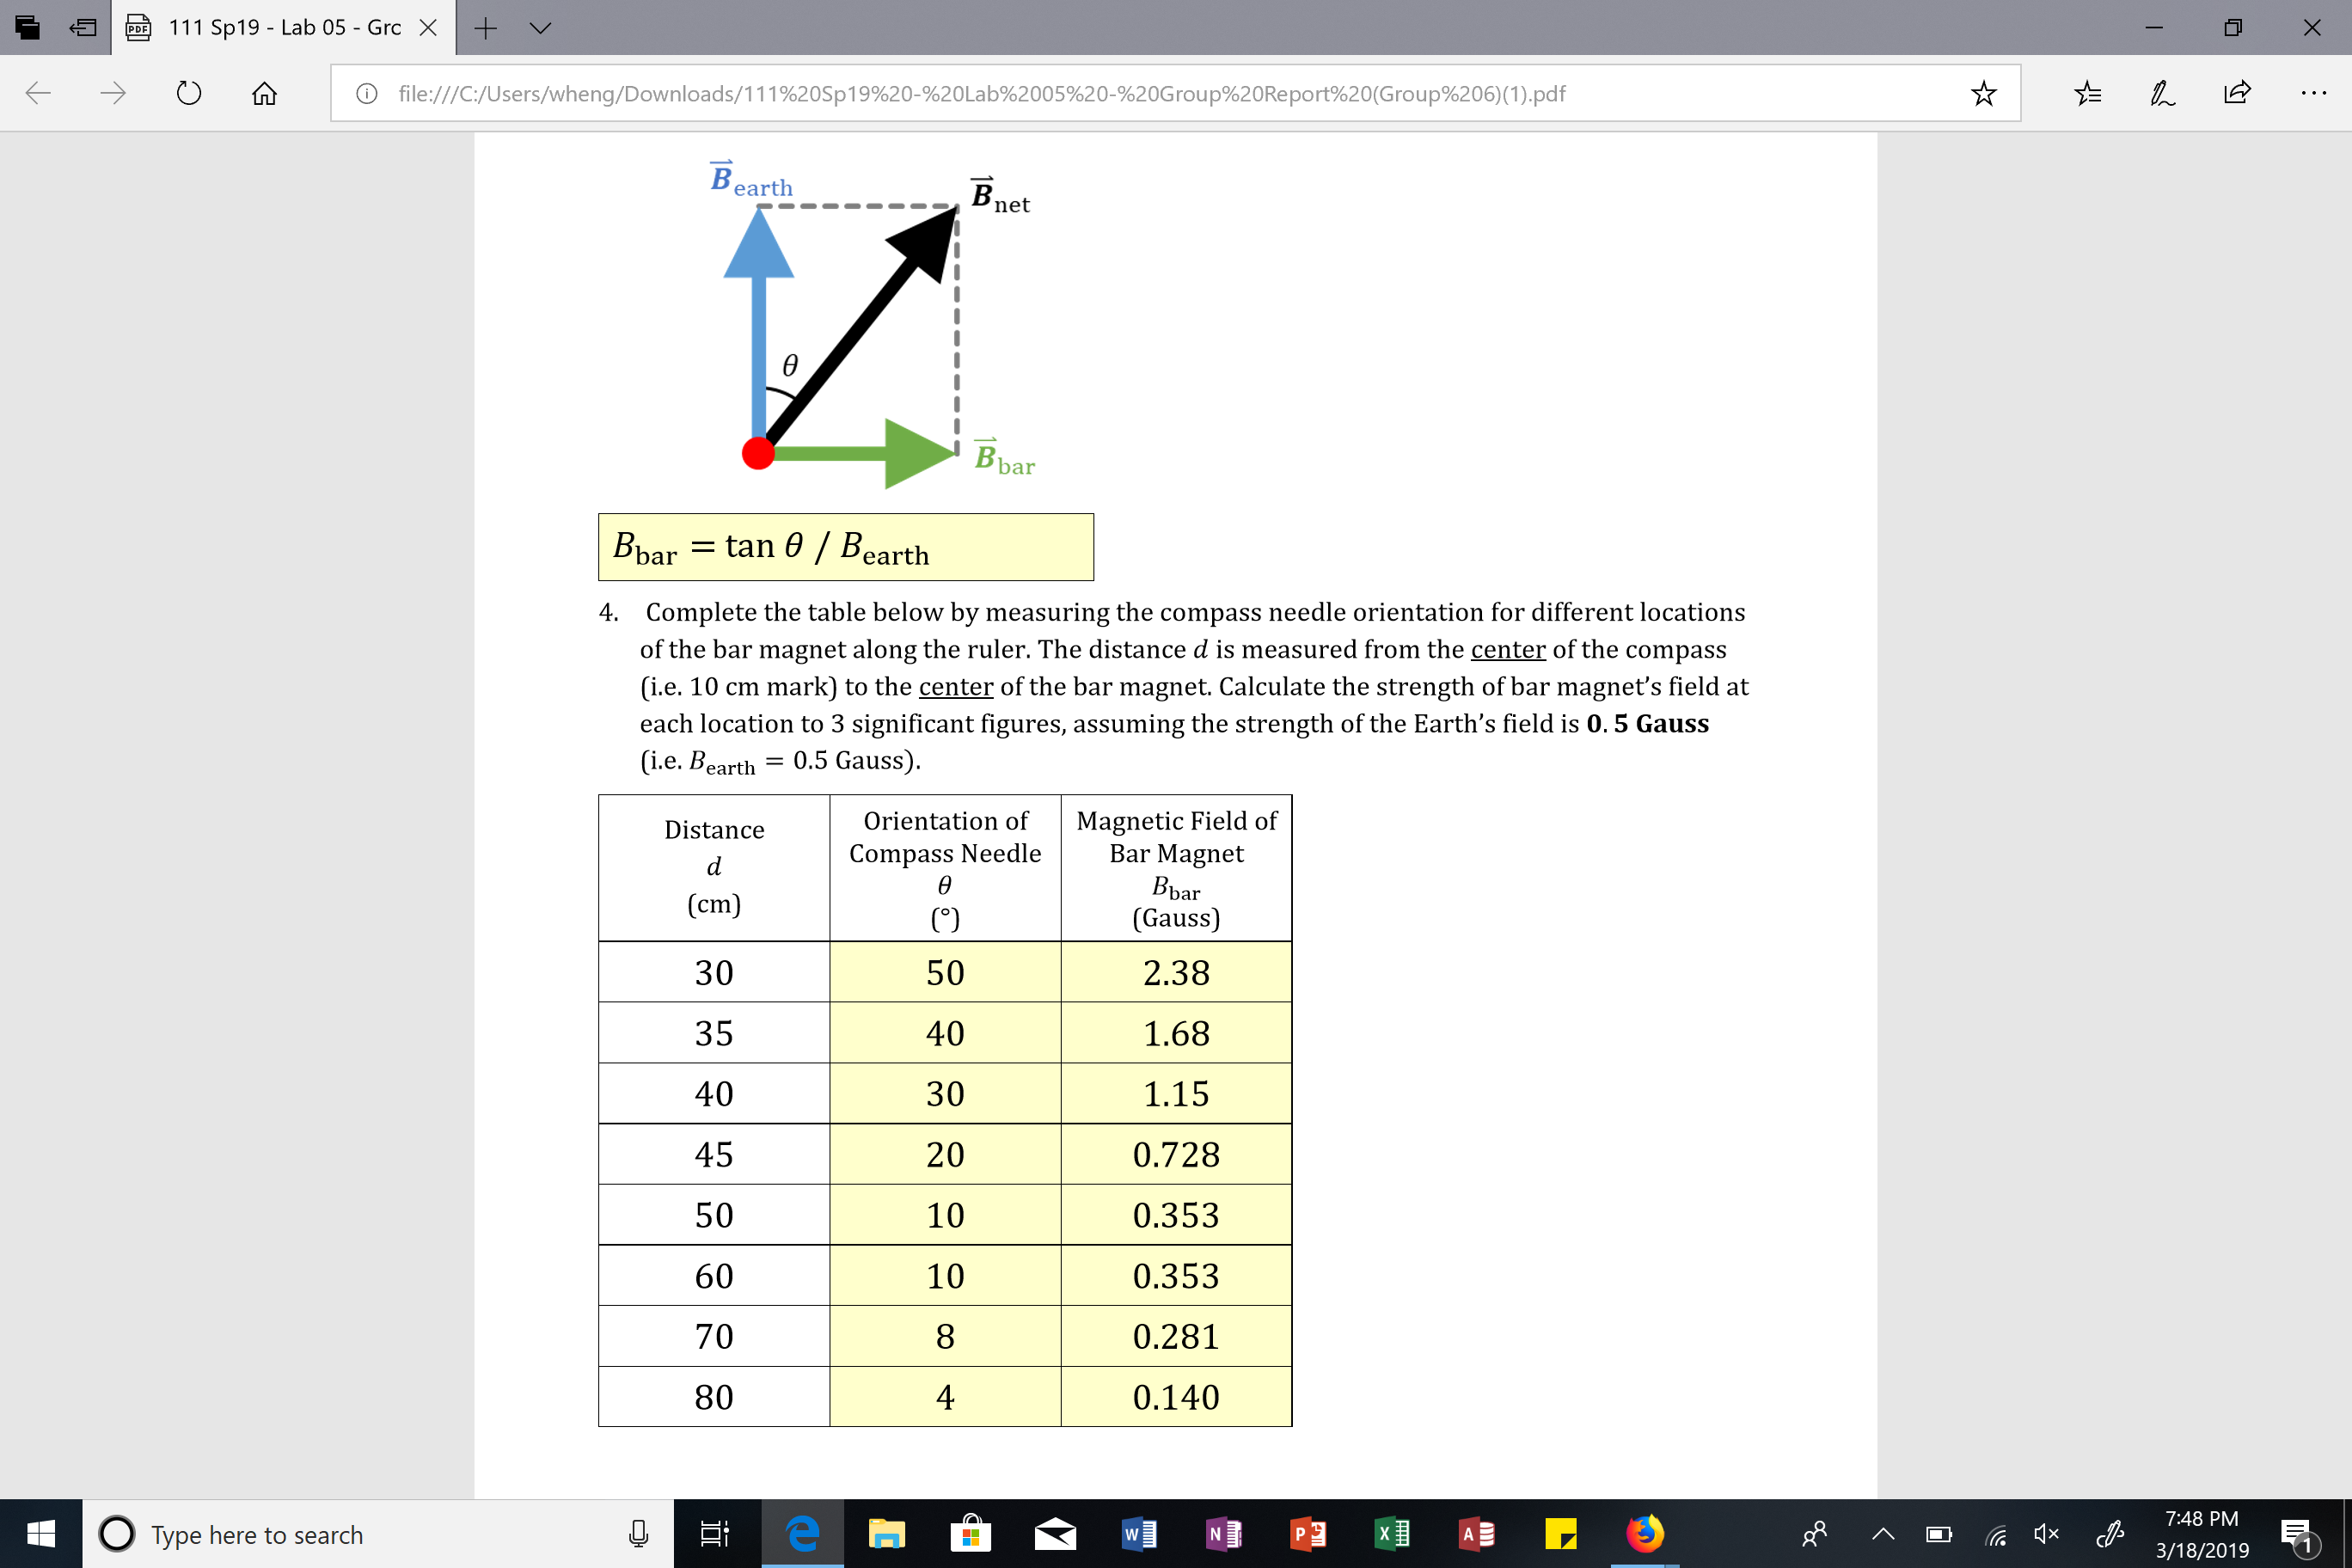 111 Sp19 - Lab 05 - Grc X
ⓘ
file:///C:/Users/wheng/Downloads/111%20Sp19%20-%20Lab%2005%20-%20Group%20Report%20(Group%206)(1).pdf
earth
net
bar
Bbar tan 6
/ Bearth
4.
Complete the table below by measuring the compass needle orientation for different locations
of the bar magnet along the ruler. The distance d is measured from the center of the compass
(i.e. 10 cm mark) to the center of the bar magnet. Calculate the strength of bar magnet's field at
each location to 3 significant figures, assuming the strength of the Earth's field is 0.5 Gauss
(i.e. Bearth-0.5 Gauss)
Orientation ofMagnetic Field of
Compass Needle
Distance
Bar Magnet
bar
(Gauss)
(cm)
30
35
40
45
50
60
70
80
50
40
30
20
10
10
2.38
1.68
1.15
0.728
0.353
0.353
0.281
0.140
4
O Type here to search
7:48 PM
3/18/2019 1
